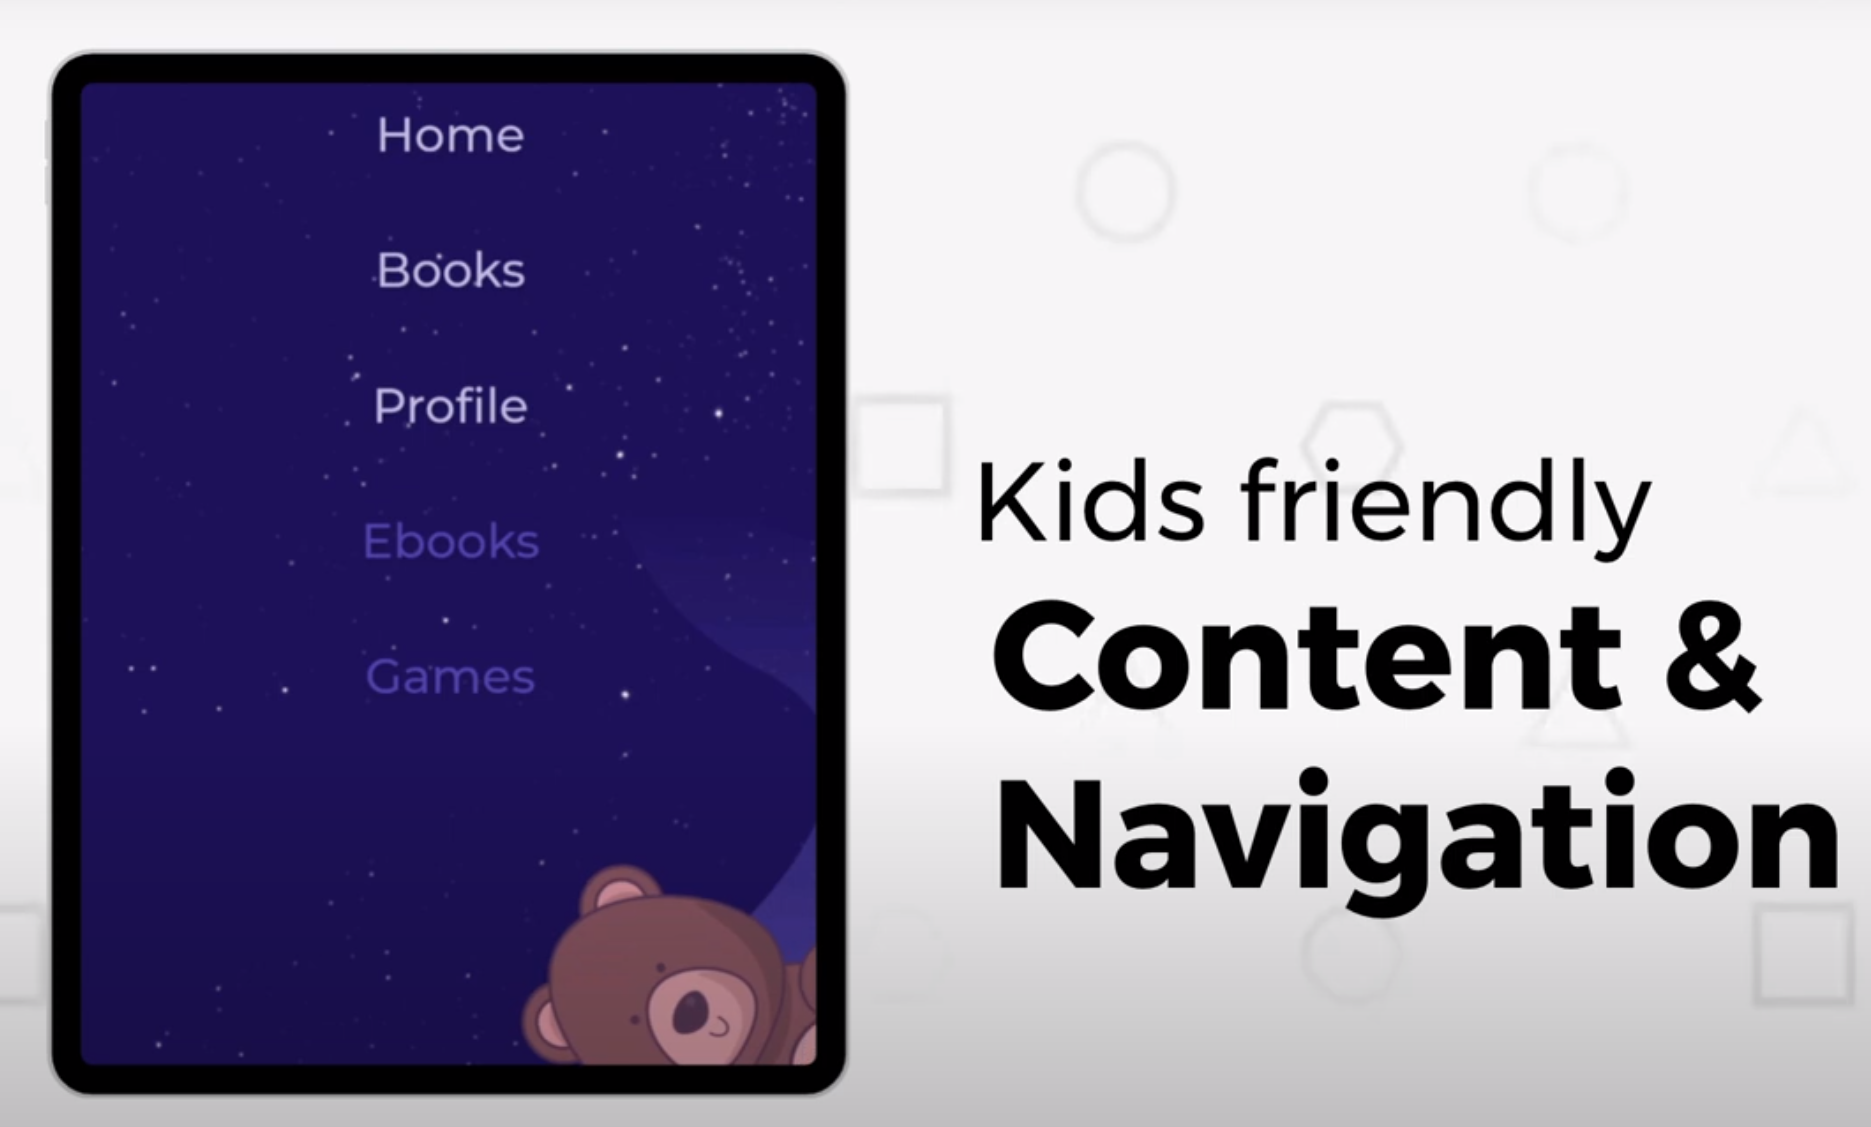 A look at the menu navigation functionality of Bedtime Stories 